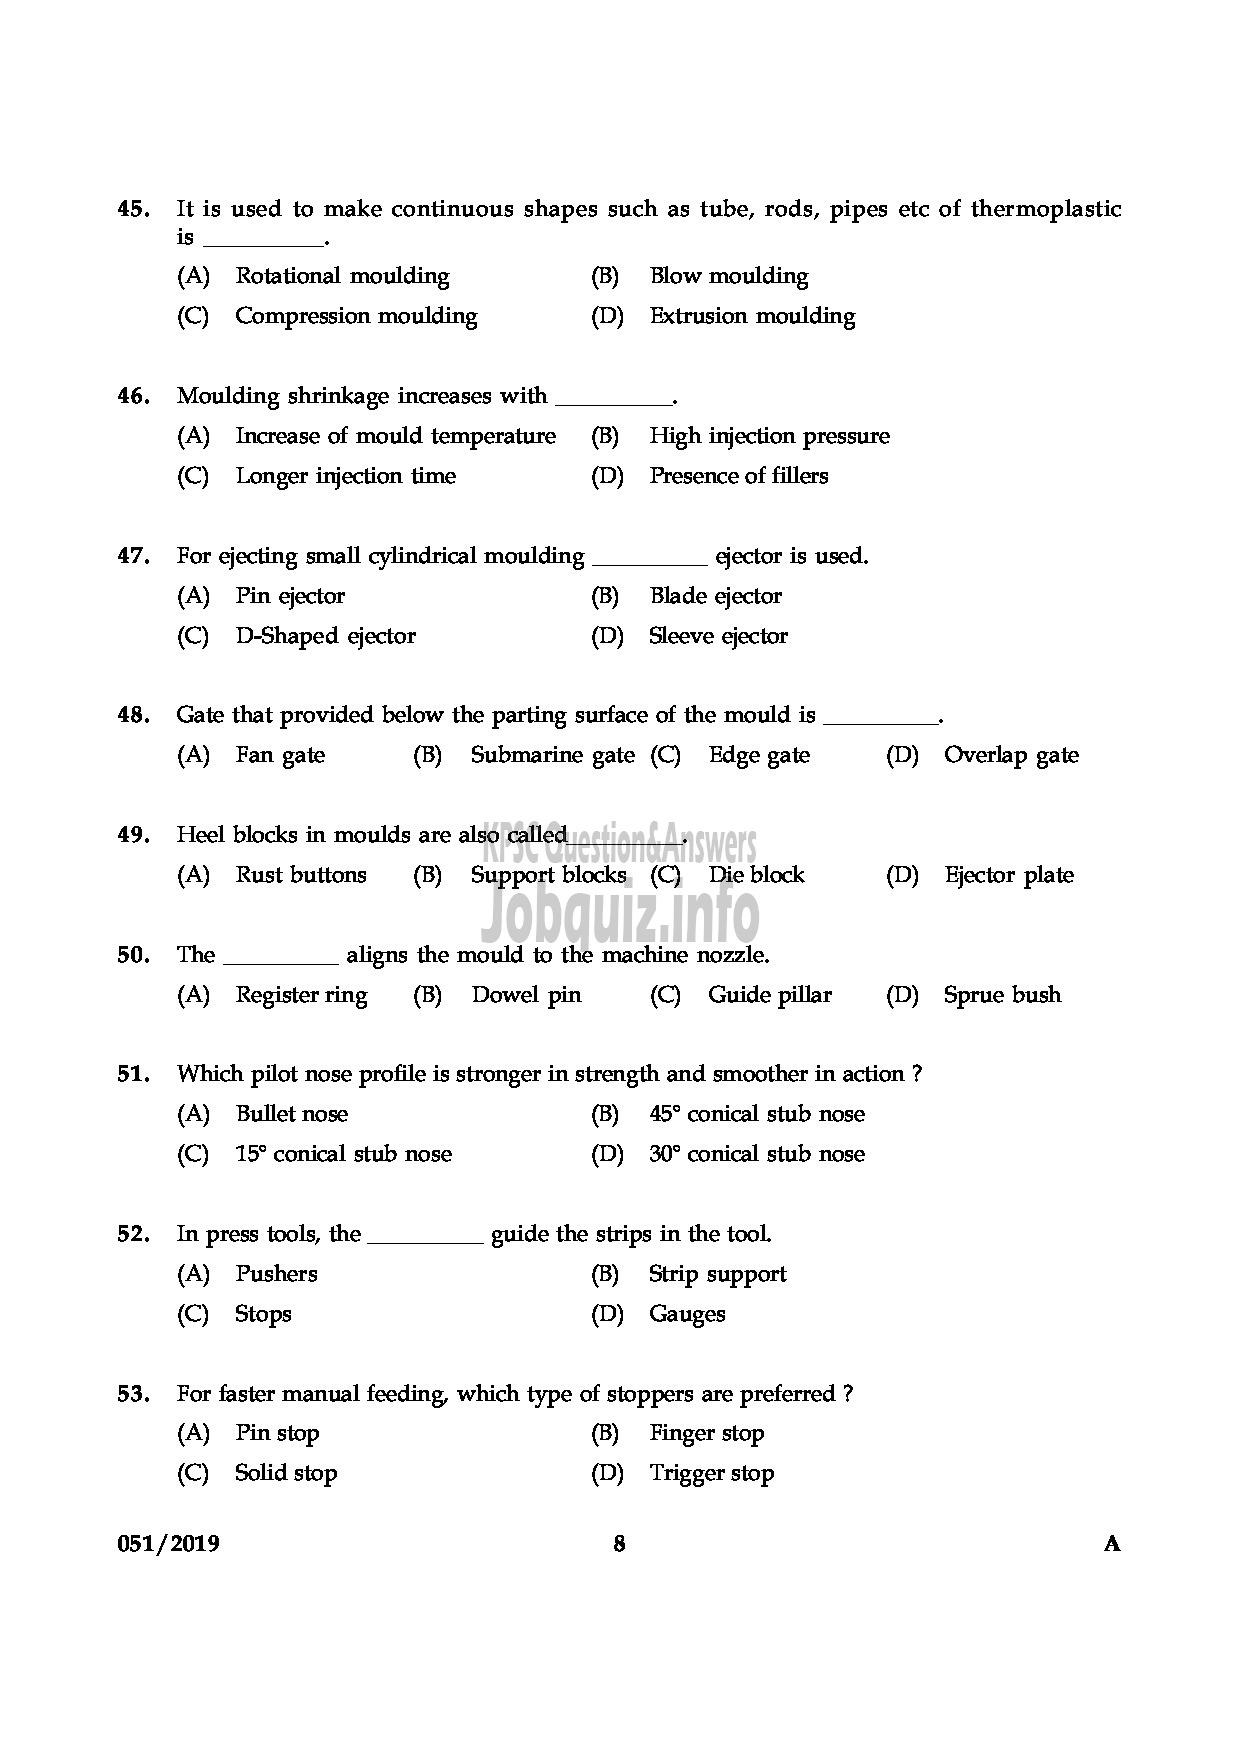 Kerala PSC Question Paper - JUNIOR INSTRUCTOR TOOL & DIE MAKER INDUSTRIAL TRAINING English -8